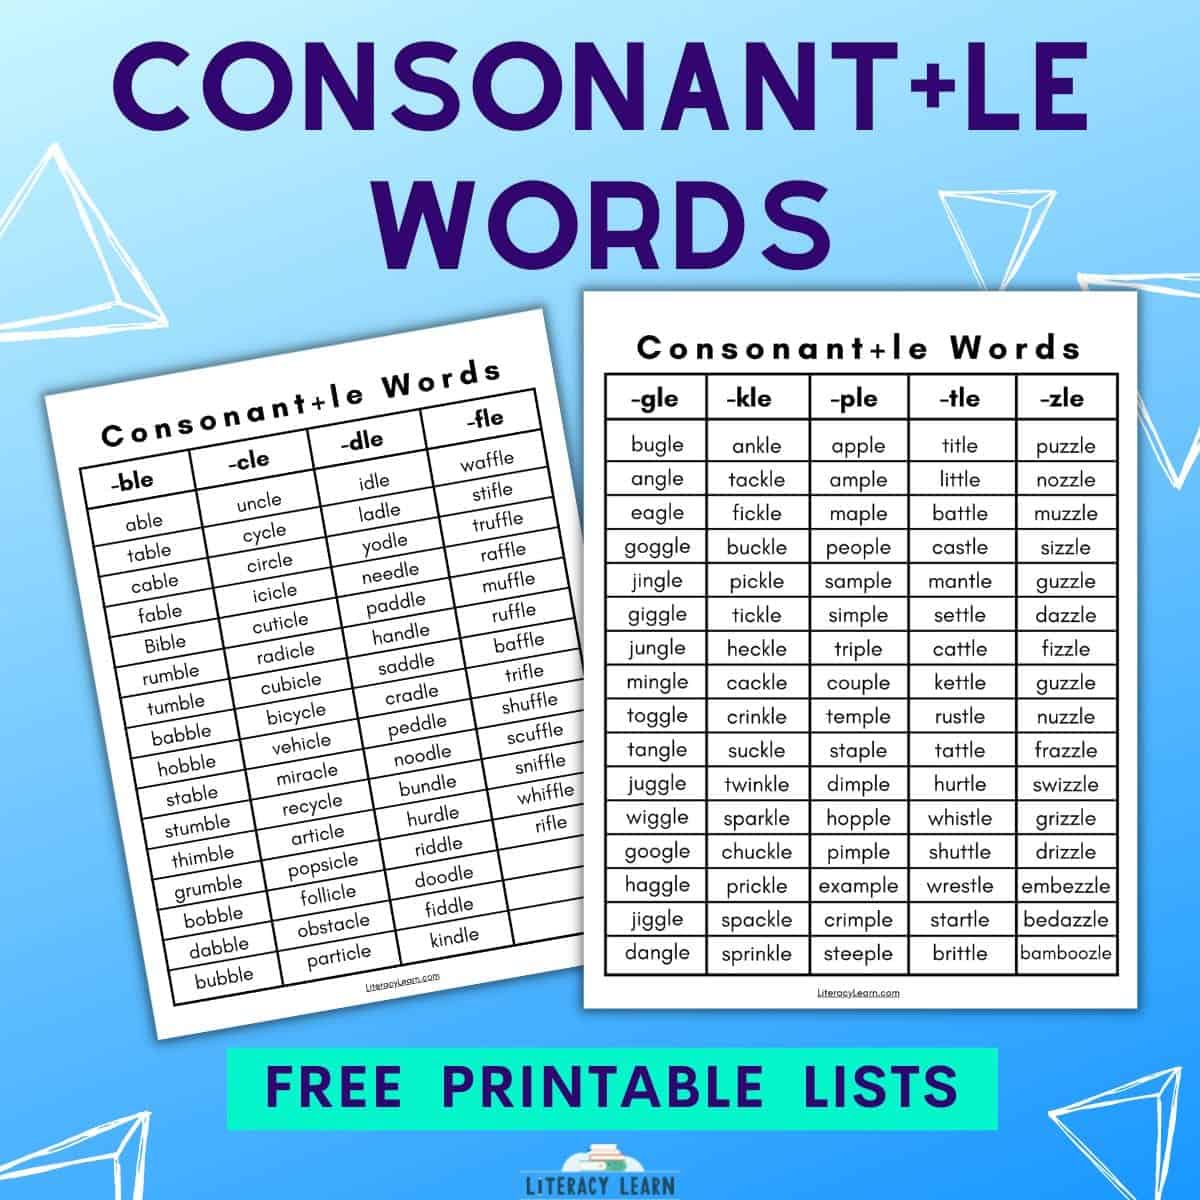 Two consonant-le worksheets with title "Consonant+LE words Free Printable Lists" on blue background.